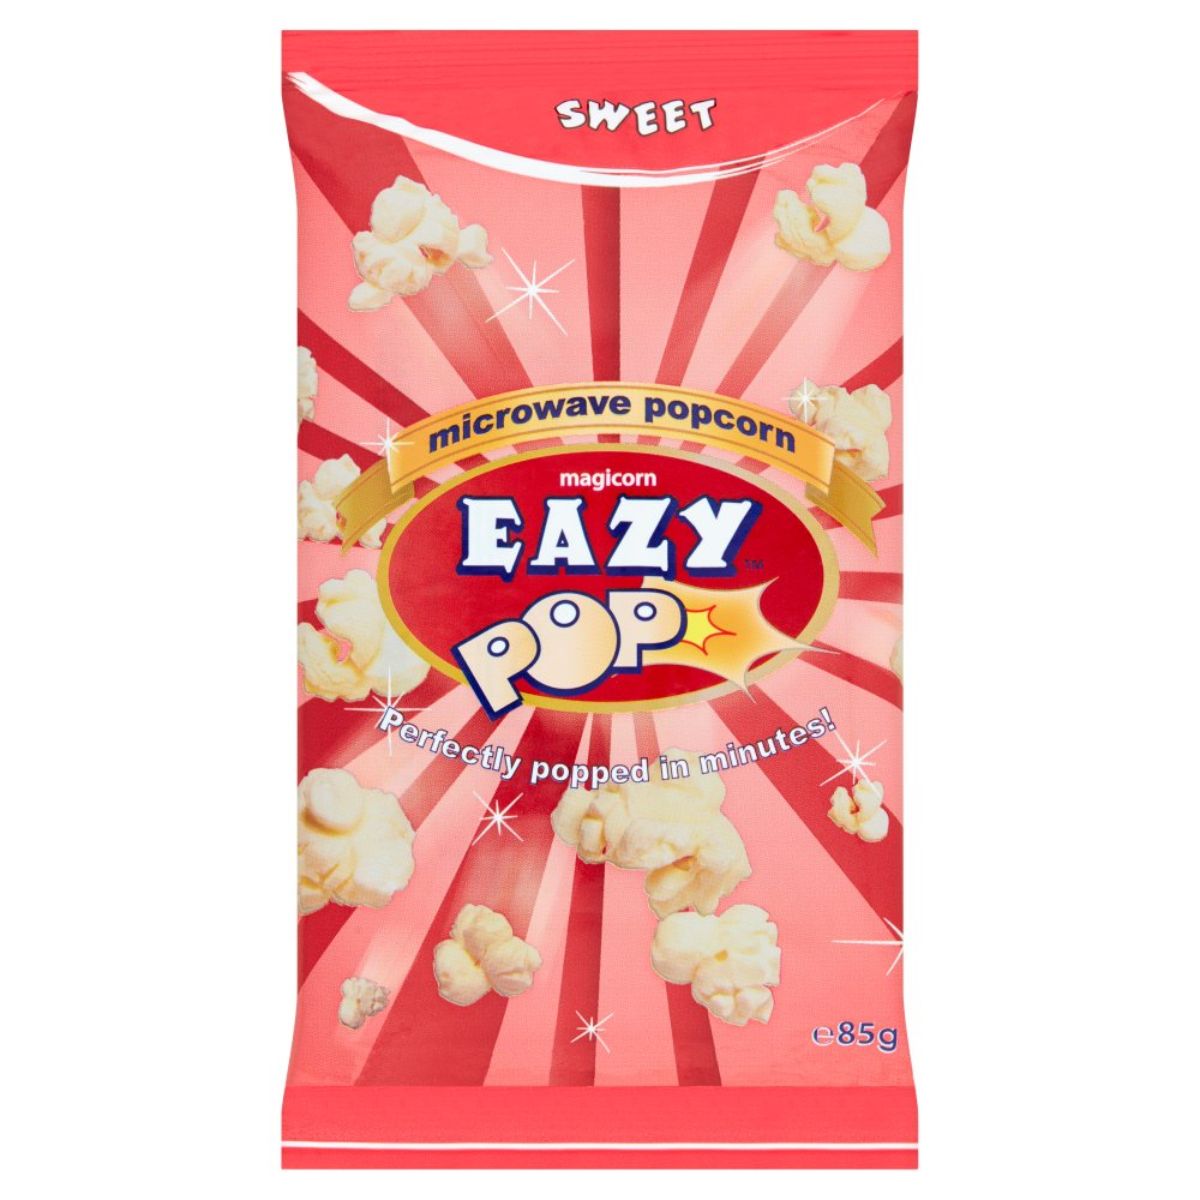 A bag of Eazy Pop - Magicorn Sweet Microwave Popcorn - 85g on a white background.